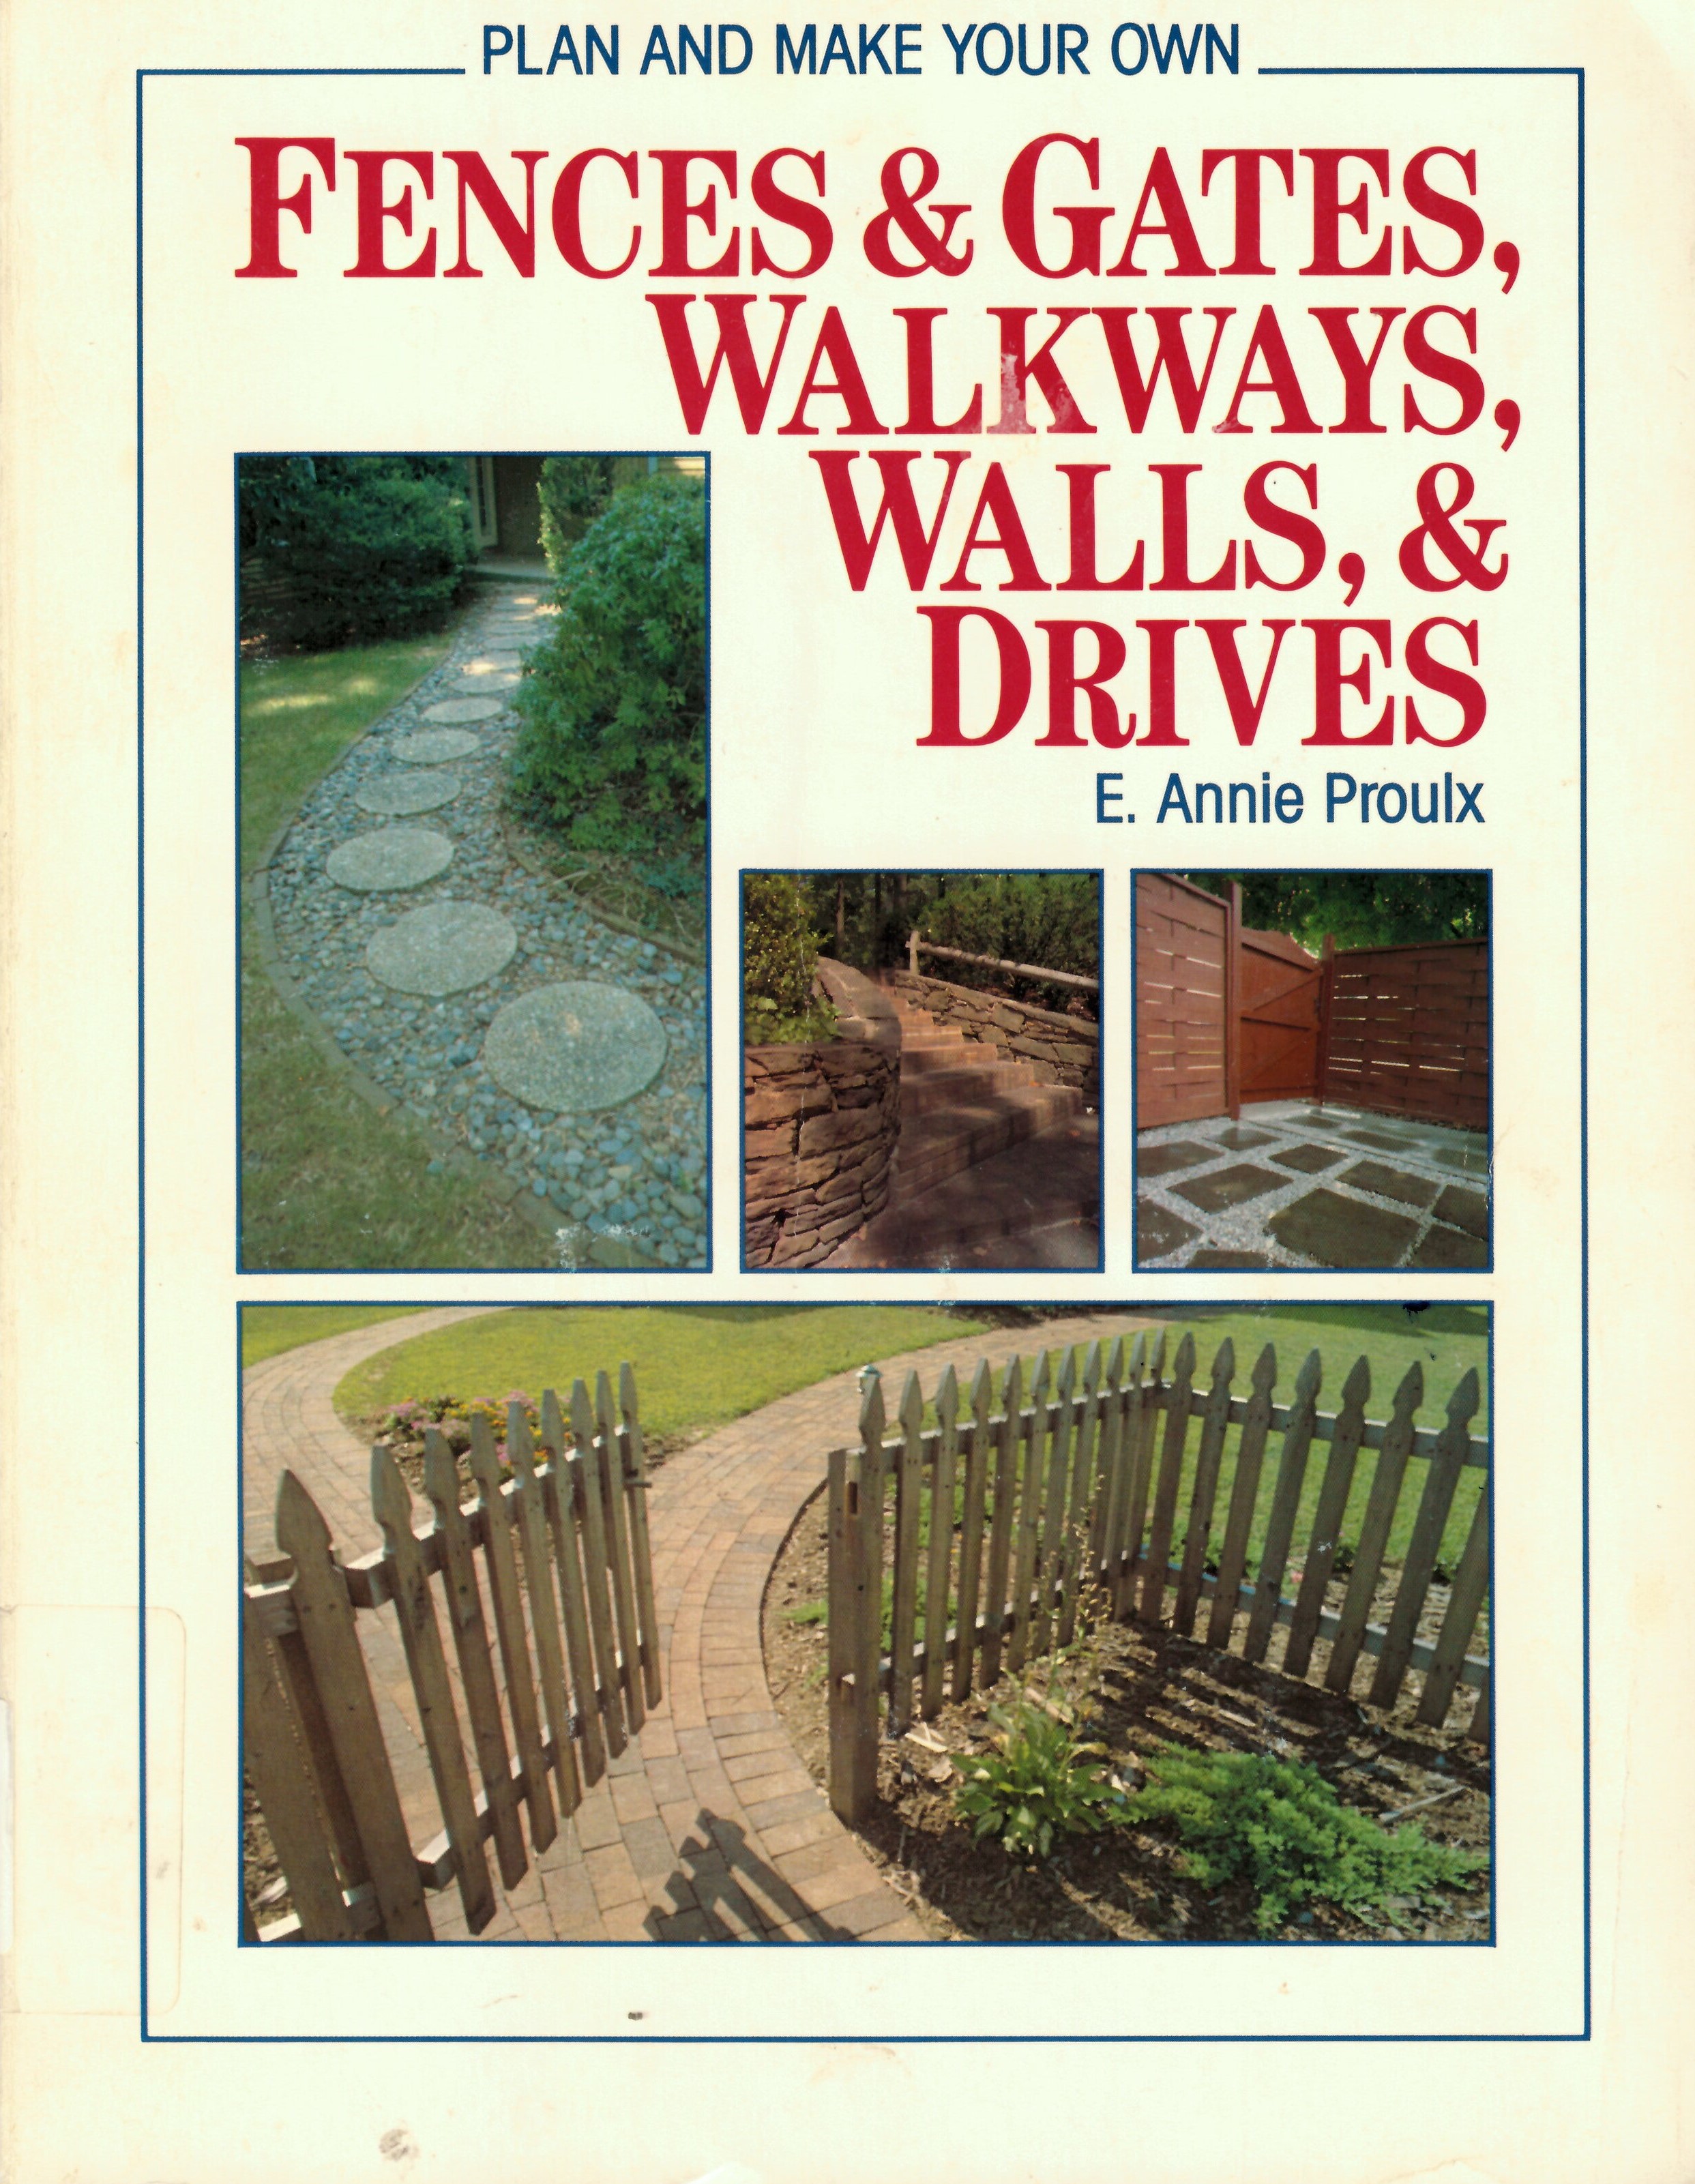 Plan and make your own fences & gates, walkways, walls,  & drives